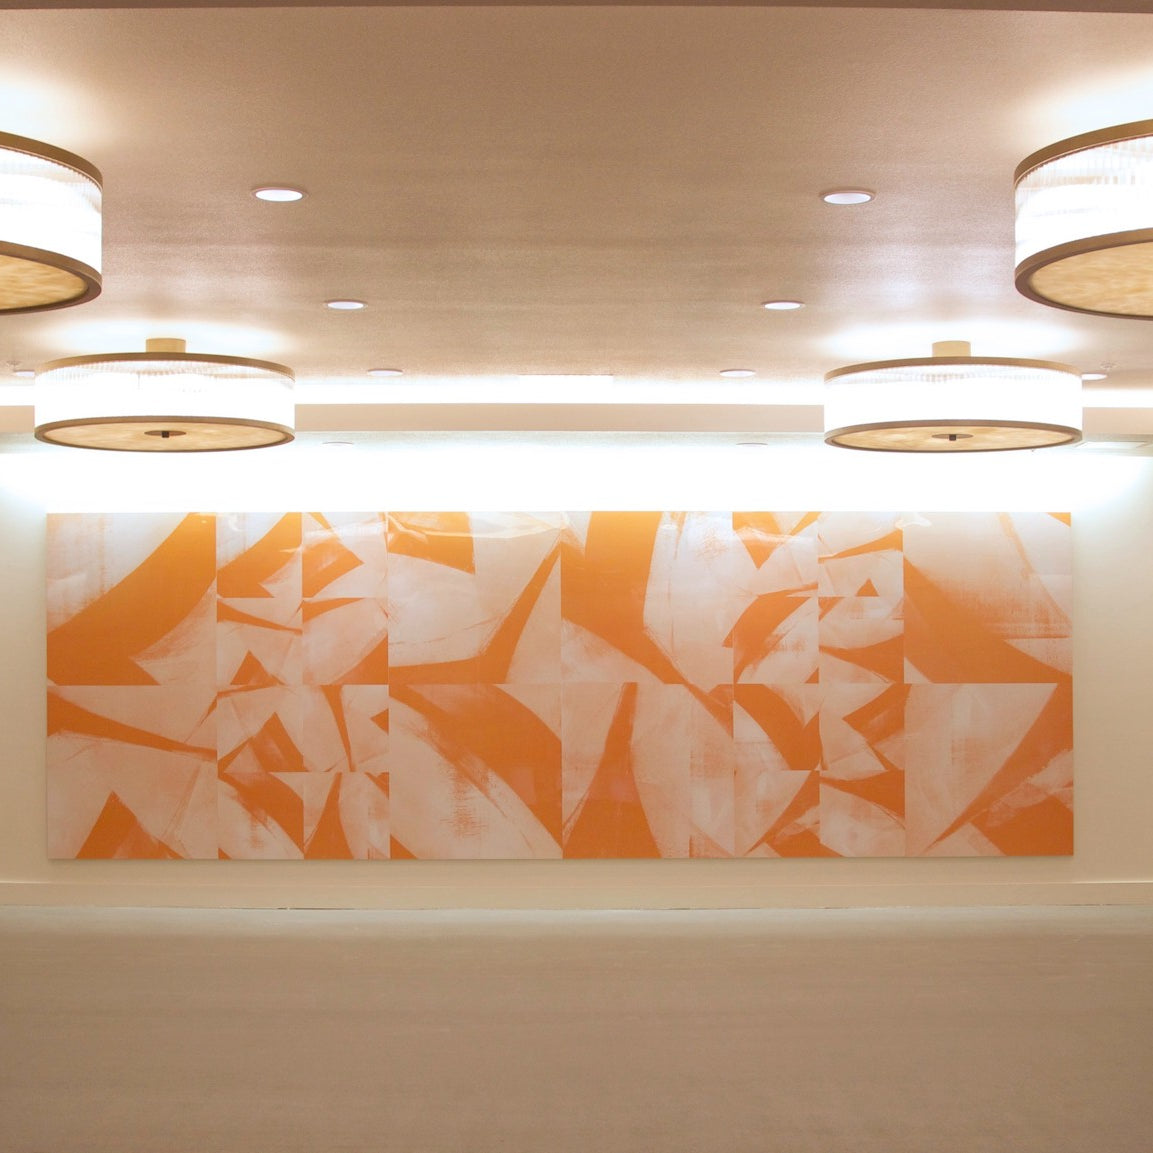 Entryway of Centerpointe motorcourt illuminated by large circular light fixtures, showcasing a warm-toned abstract geometric mural, inviting a sense of modern elegance.